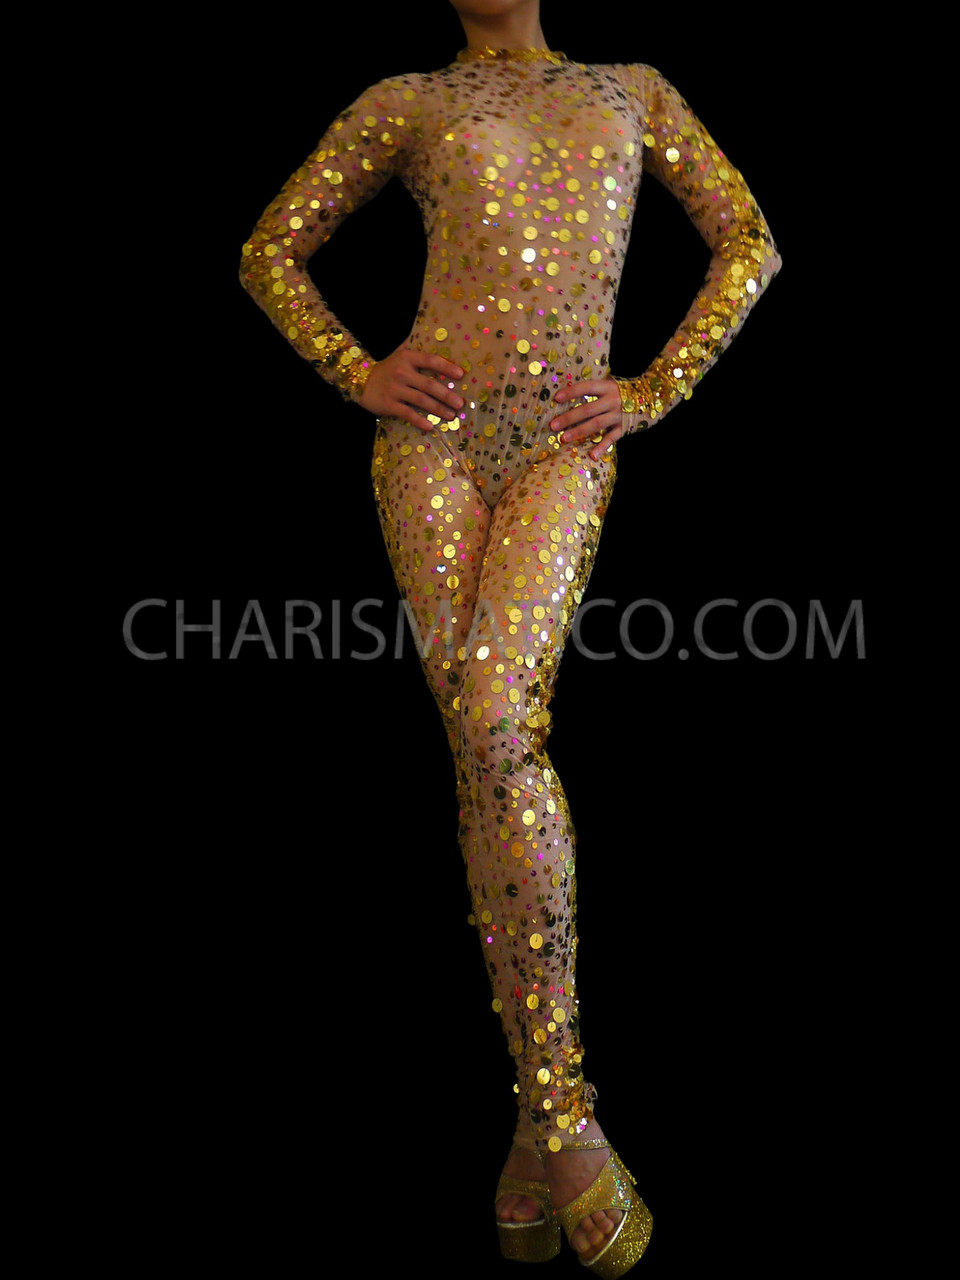 Limited  Yellow and Gold Shiny Metallic Patterned Zentai Suit